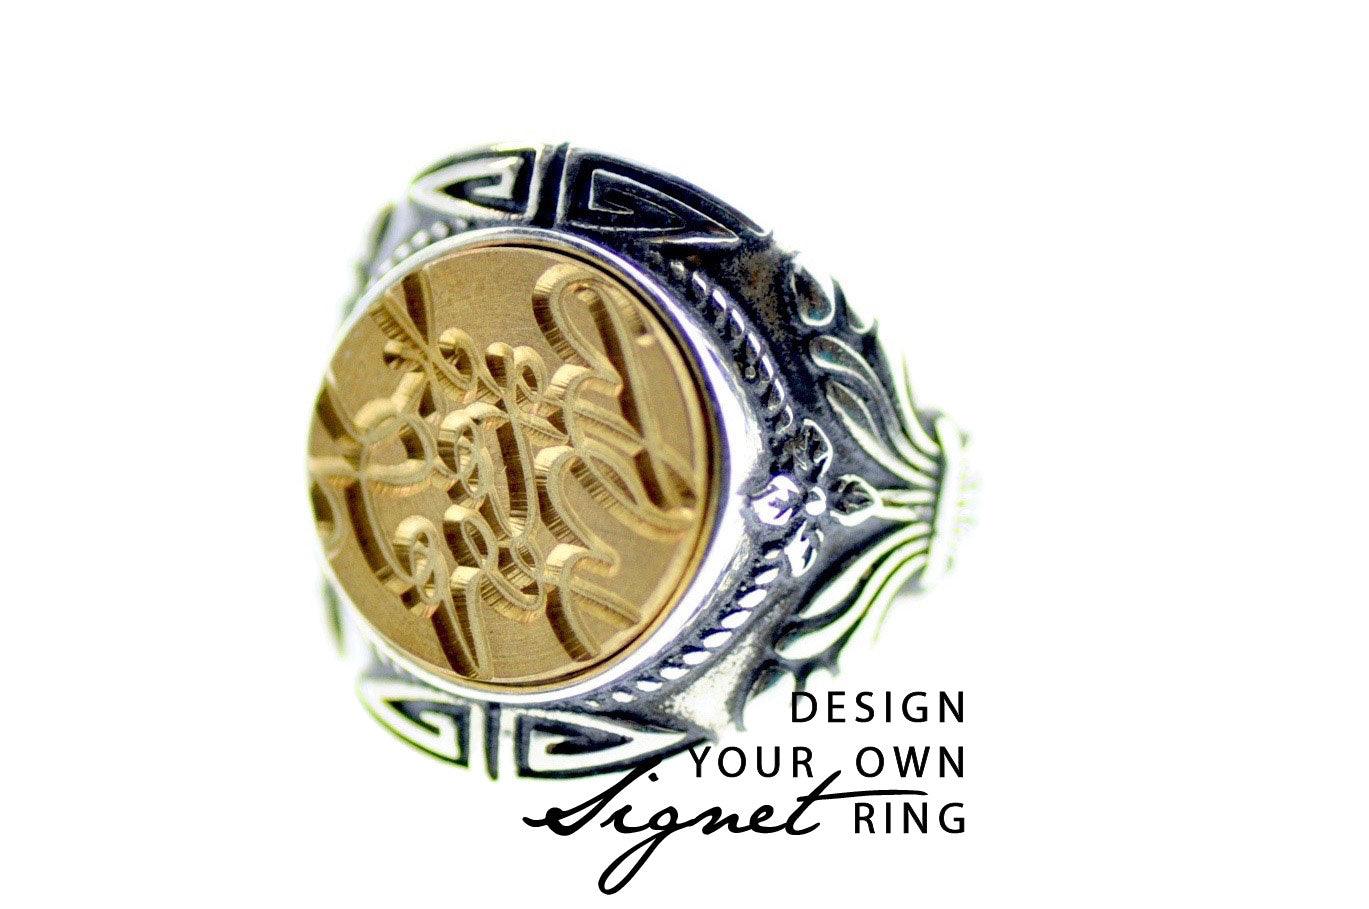 Design your own 14mm Floral Wreath  Signet Ring - Backtozero B20 - 14fw, 14mm, 14mm ring, accessory, bespoke, claw, Custom, customsignet, Decorative, Design Your Own, floral, him, jewelry, logo, ring, signet ring, size 10, size 9, wax seal, wax seal stamp, wreath